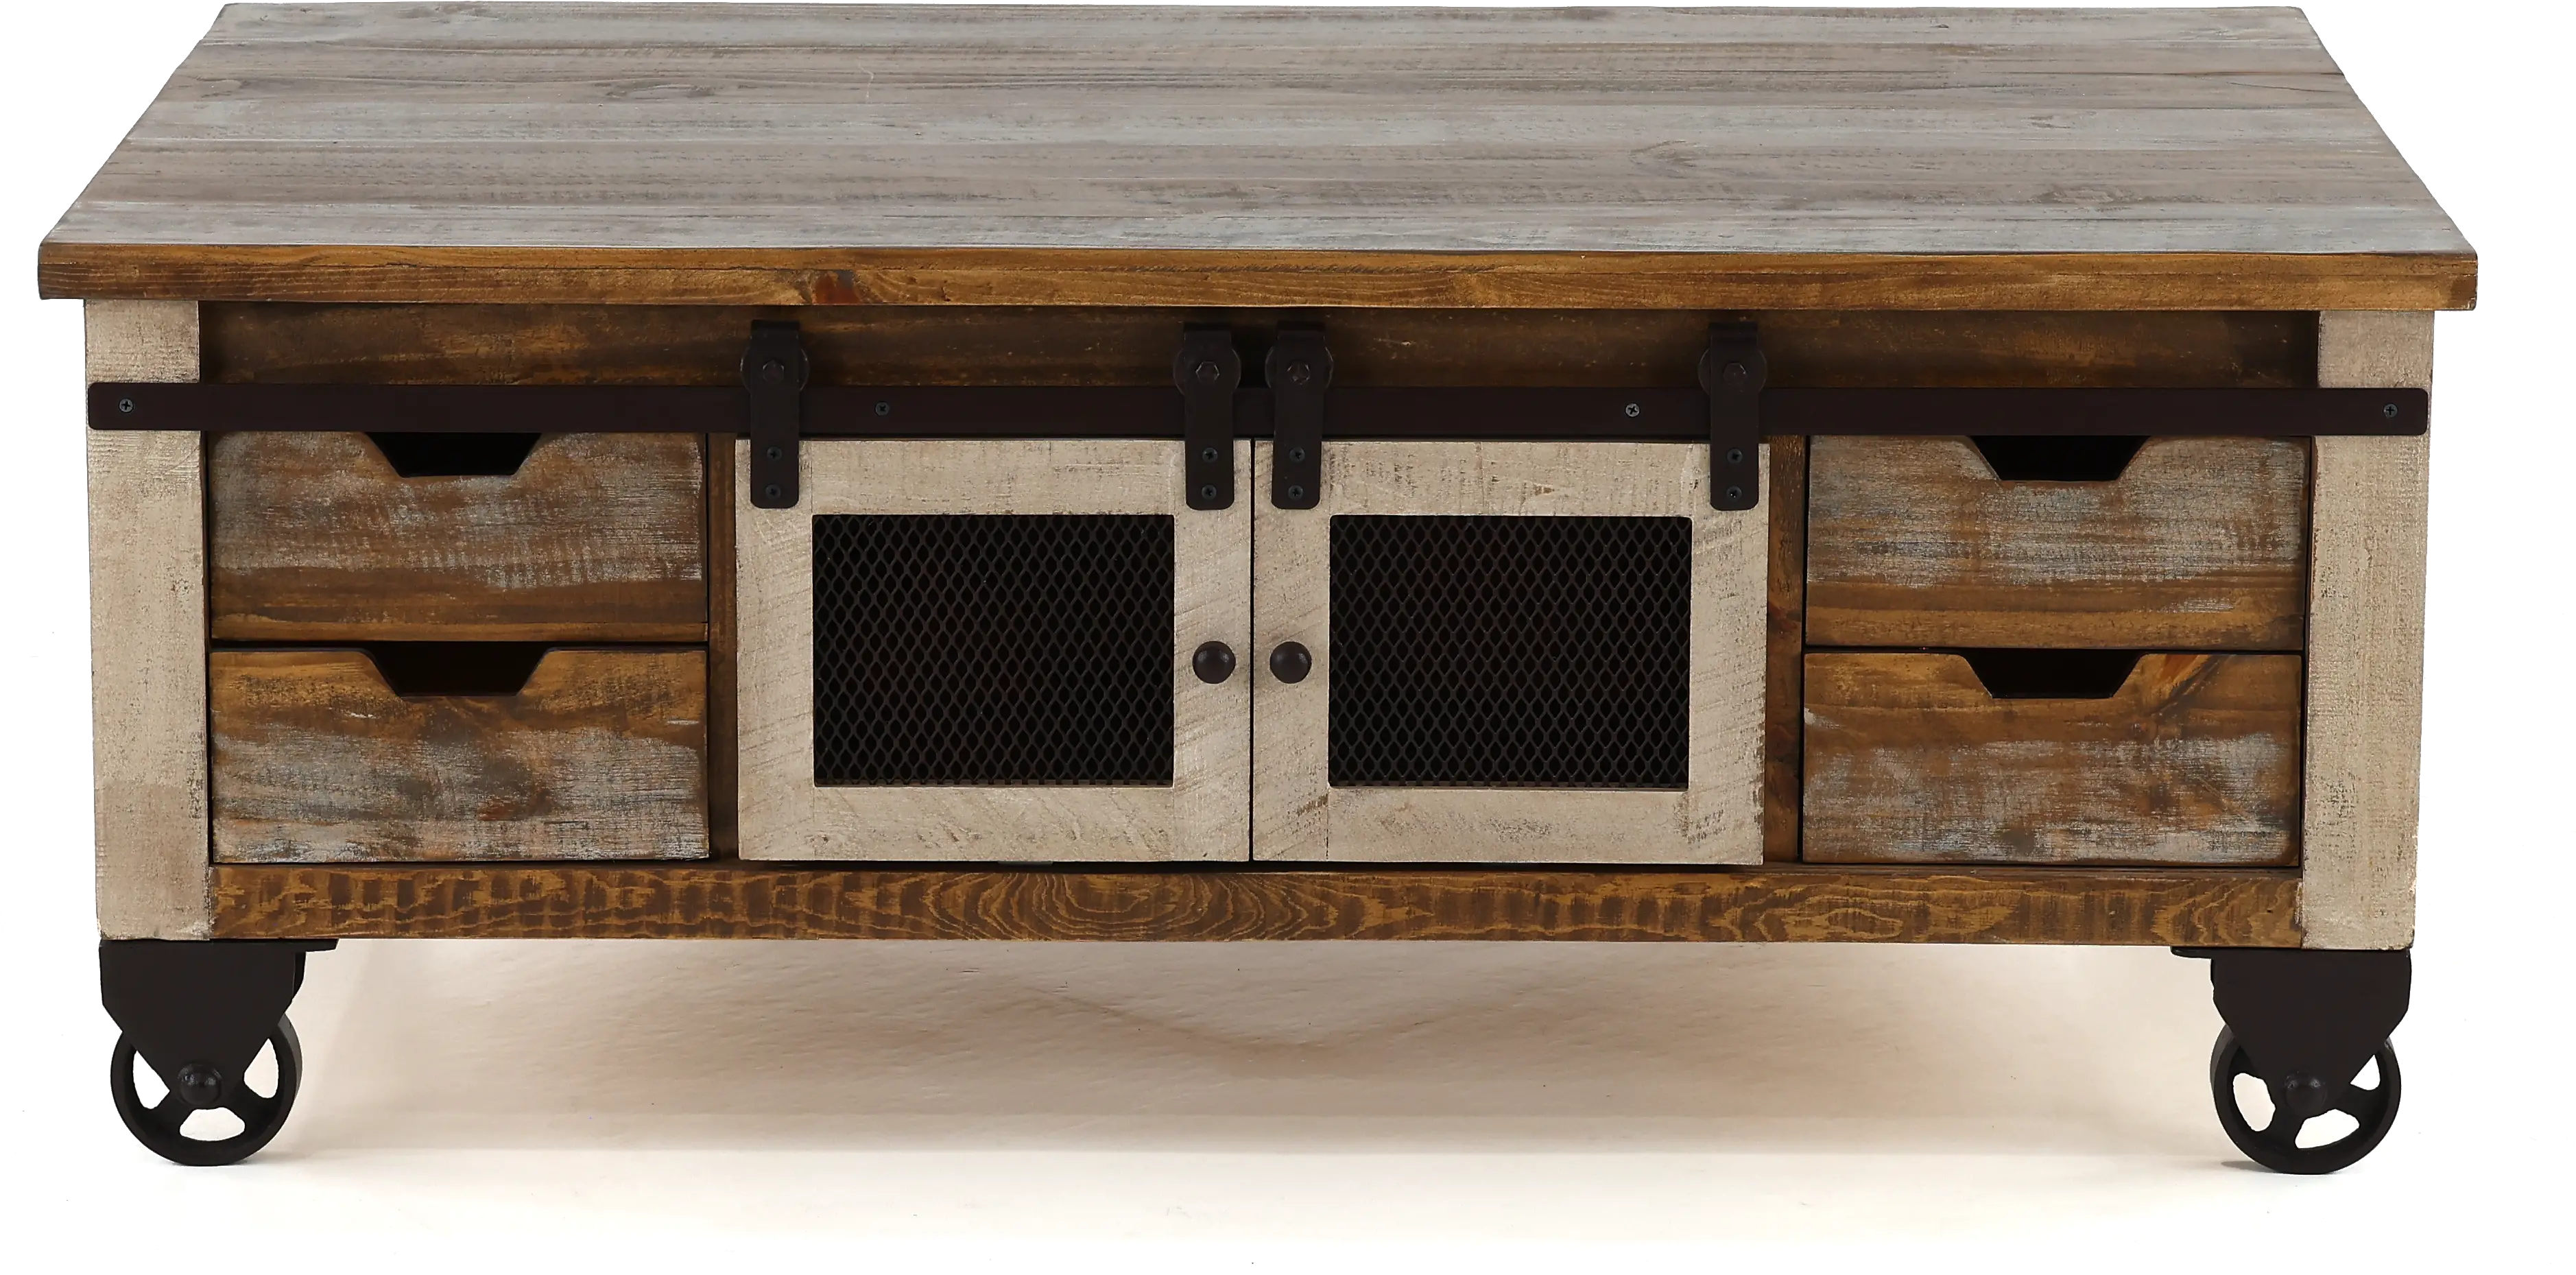 RC Willey - We are obsessed with this rustic trunk coffee table